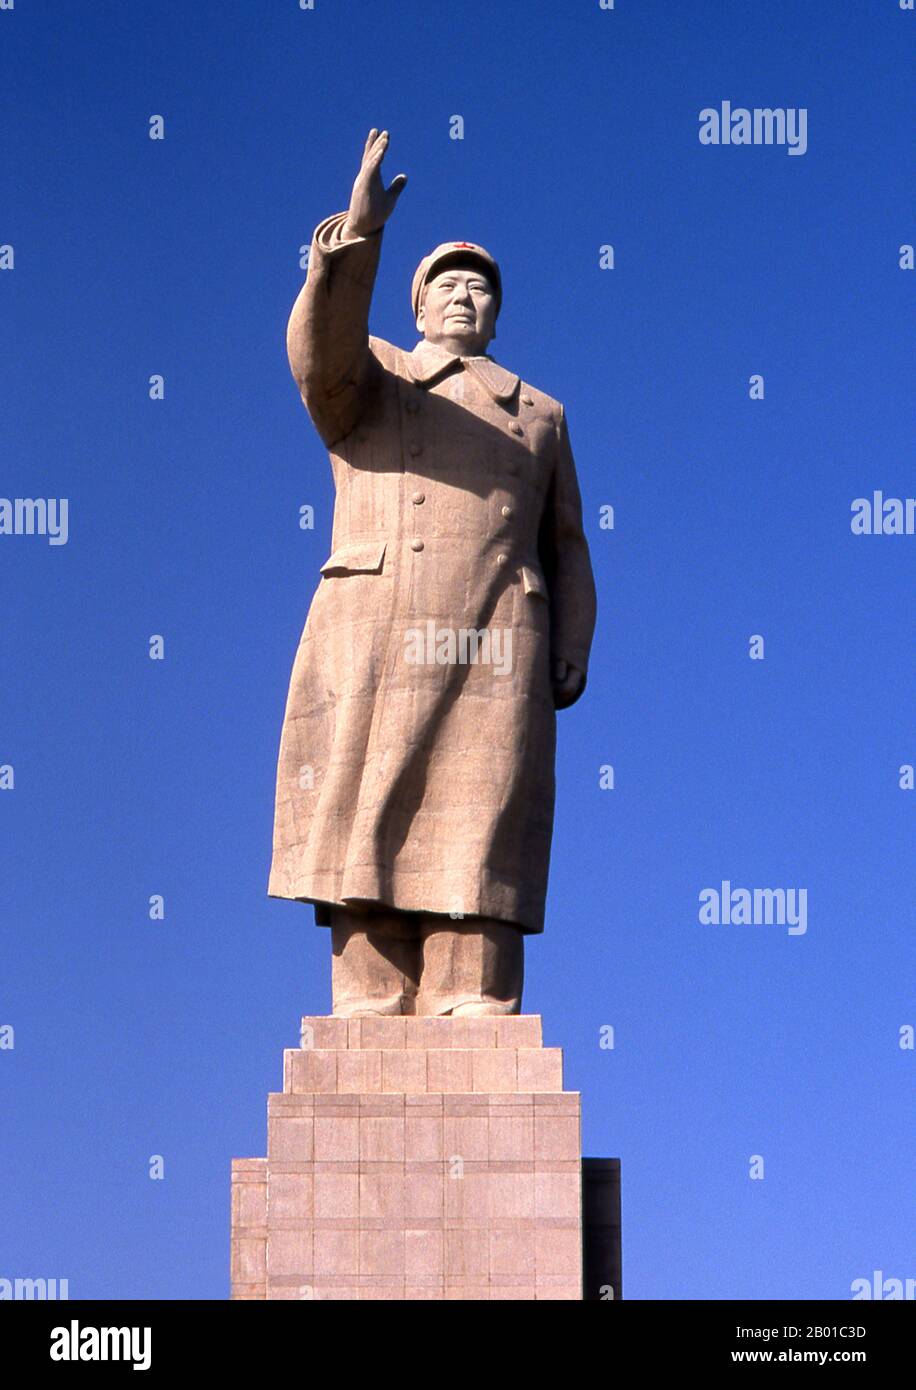 China: Statue of Mao Zedong (26 December 1893 - 9 September 1976) Chairman of the People's Republic of China, Kashgar, Xinjiang Province.  Mao Zedong, also transliterated as Mao Tse-tung, was a Chinese communist revolutionary, guerrilla warfare strategist, author, political theorist and leader of the Chinese Revolution.  Commonly referred to as Chairman Mao, he was the architect of the People's Republic of China (PRC) from its establishment in 1949, and held authoritarian control over the nation until his death in 1976. Stock Photo